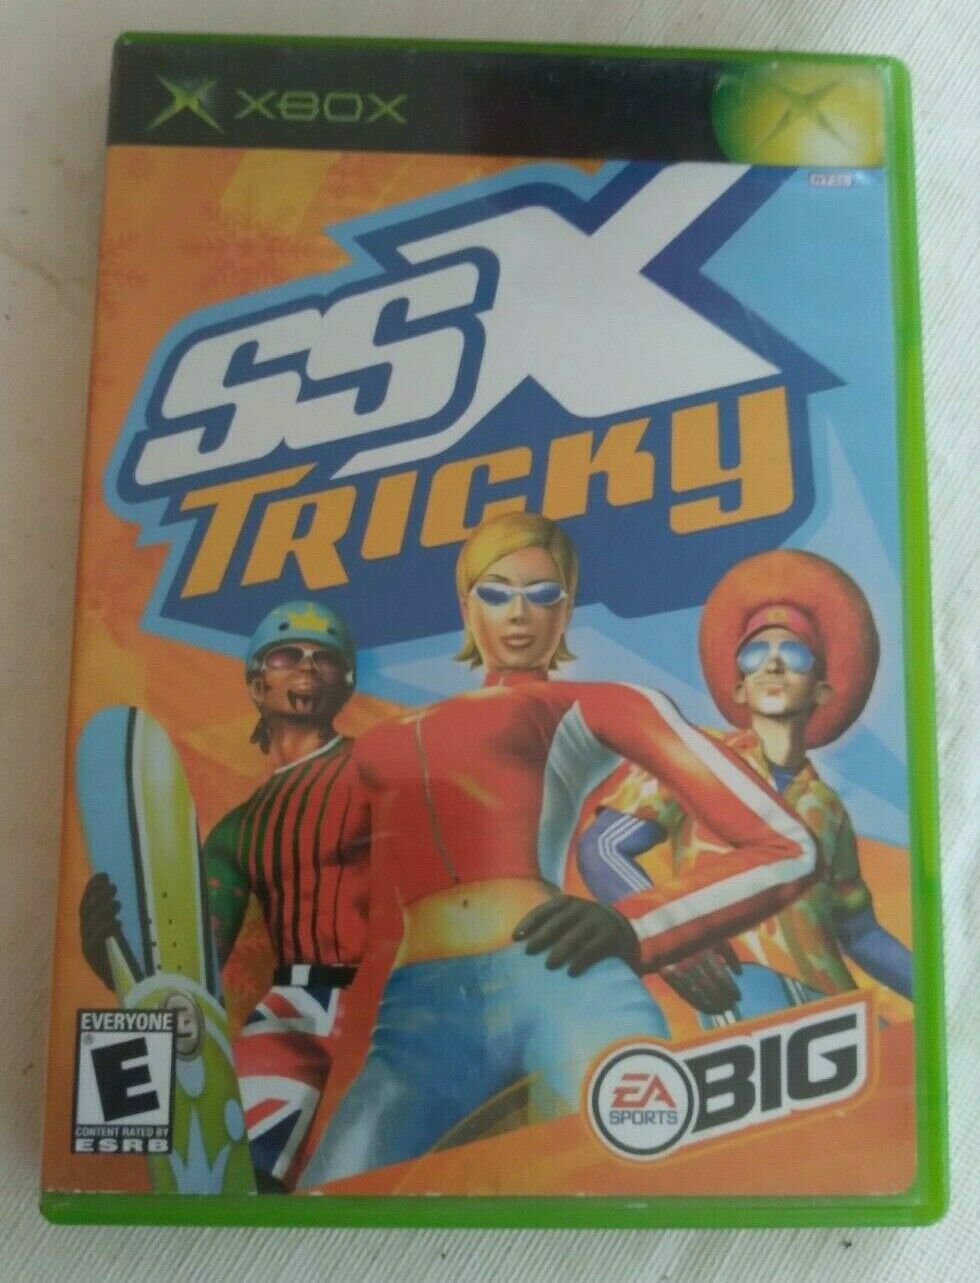 SSX Tricky Platinum Hits (Microsoft Xbox Original, 2001) With Manual Tested